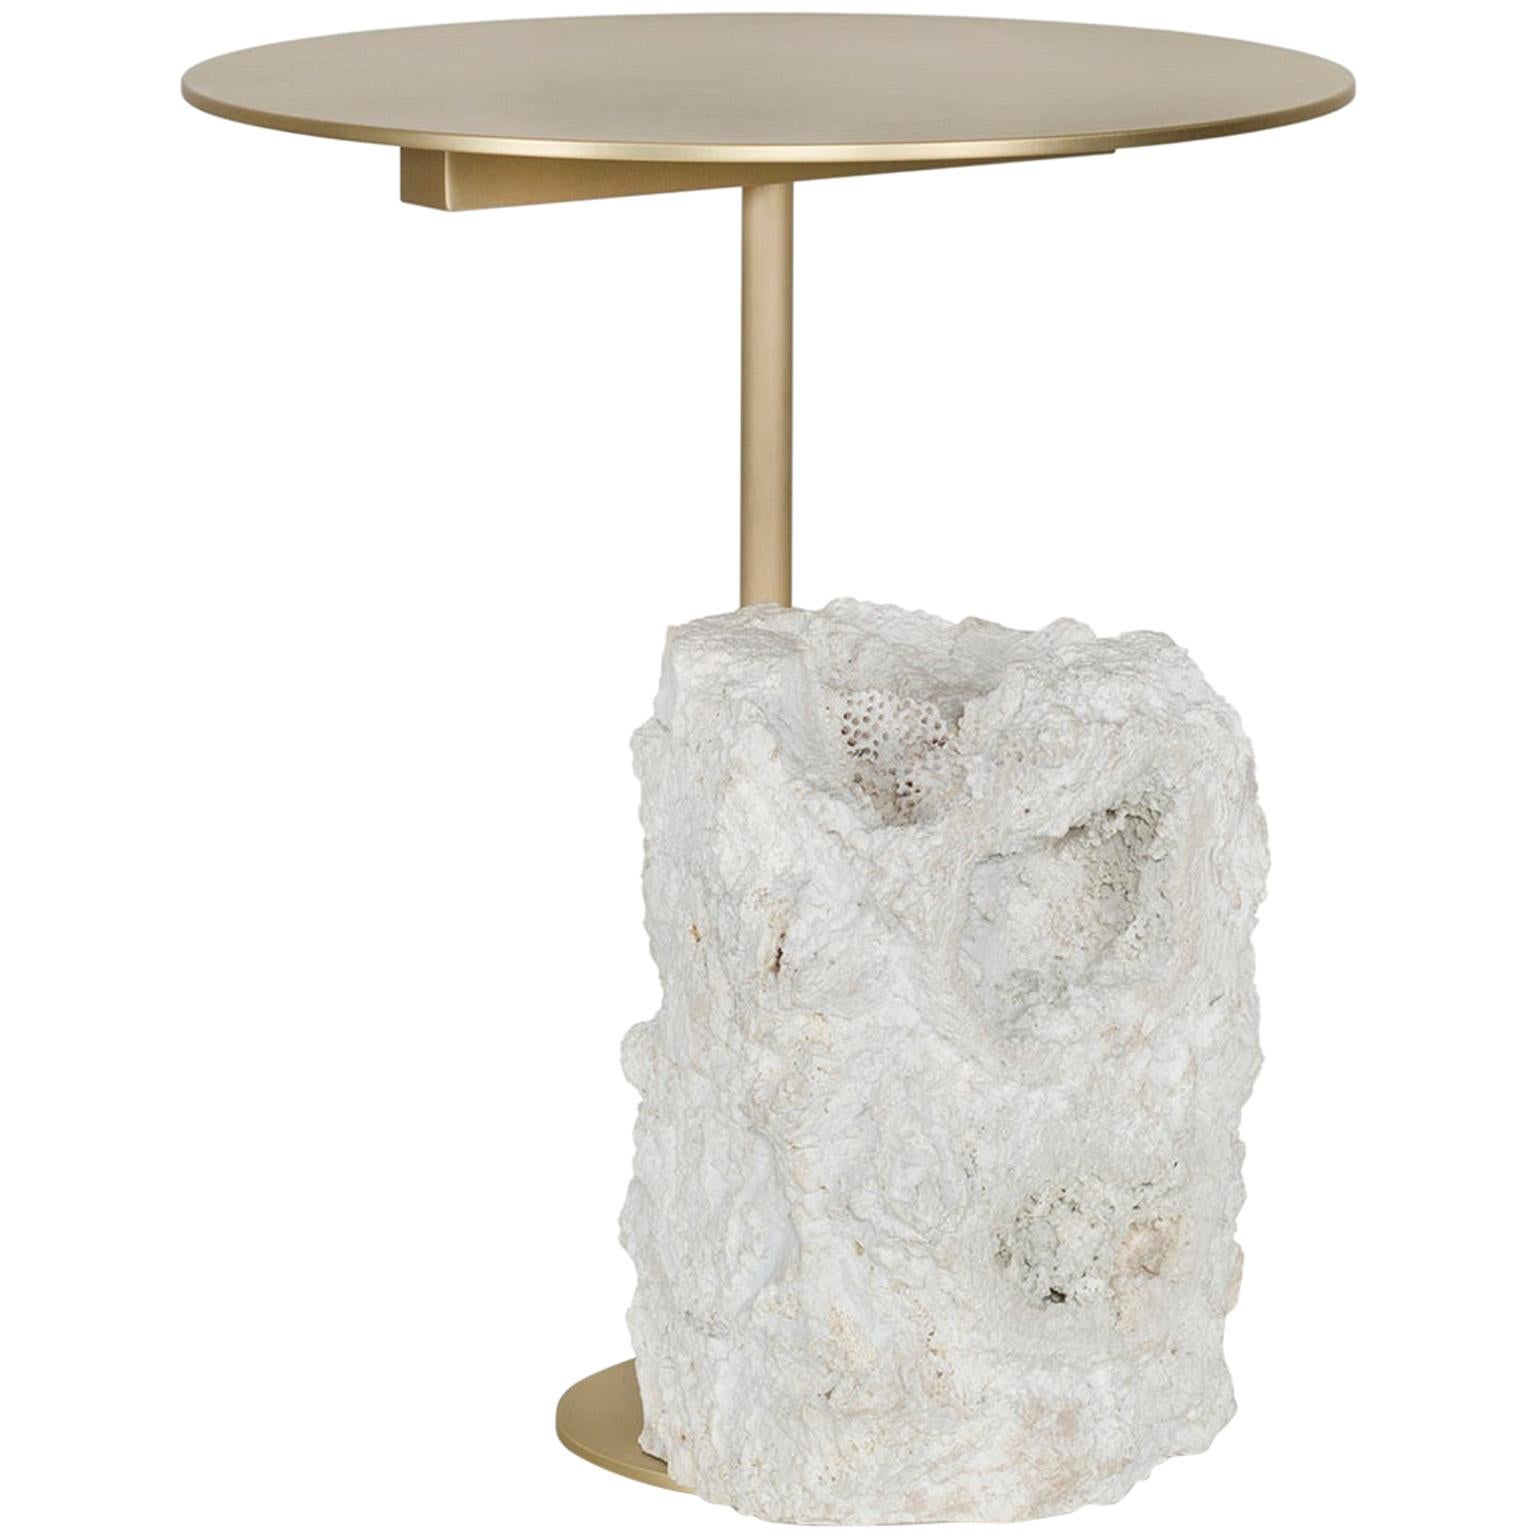 Pico Side Table S Coral Color Stone and Brushed Brass Handcrafted by Greenapple